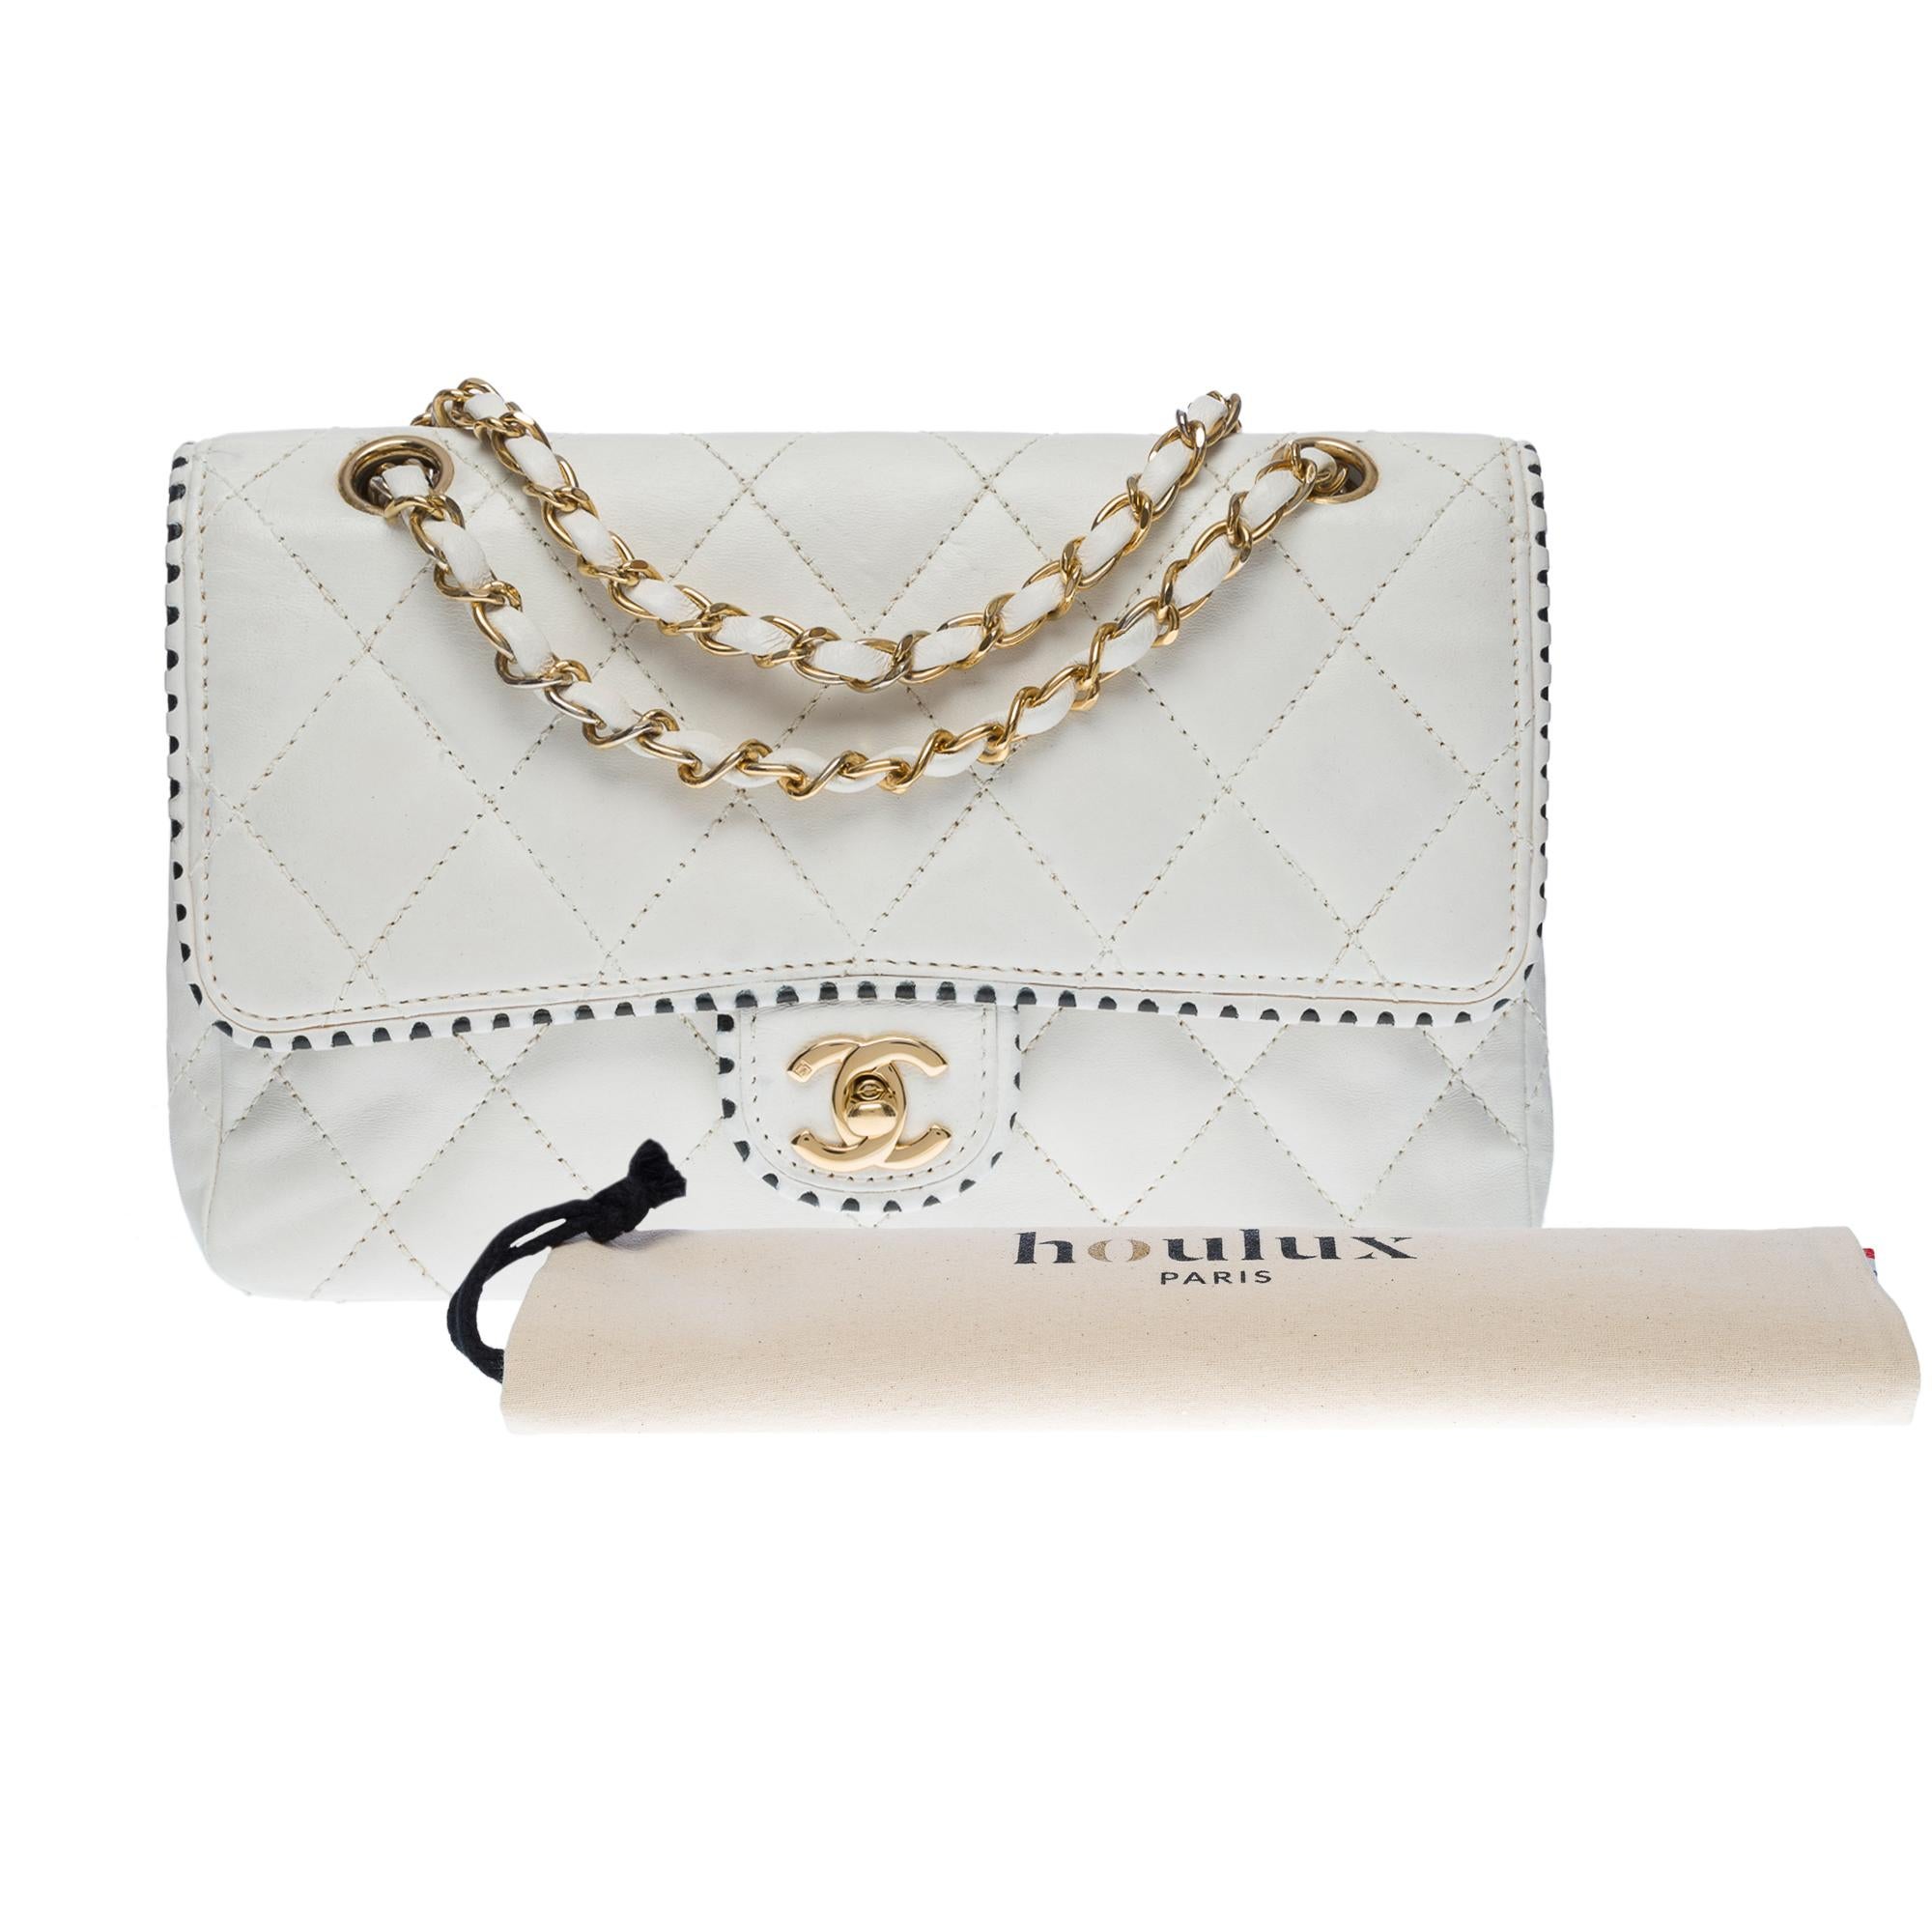 Chanel Timeless Medium single flap shoulder bag in white quilted leather, GHW For Sale 7